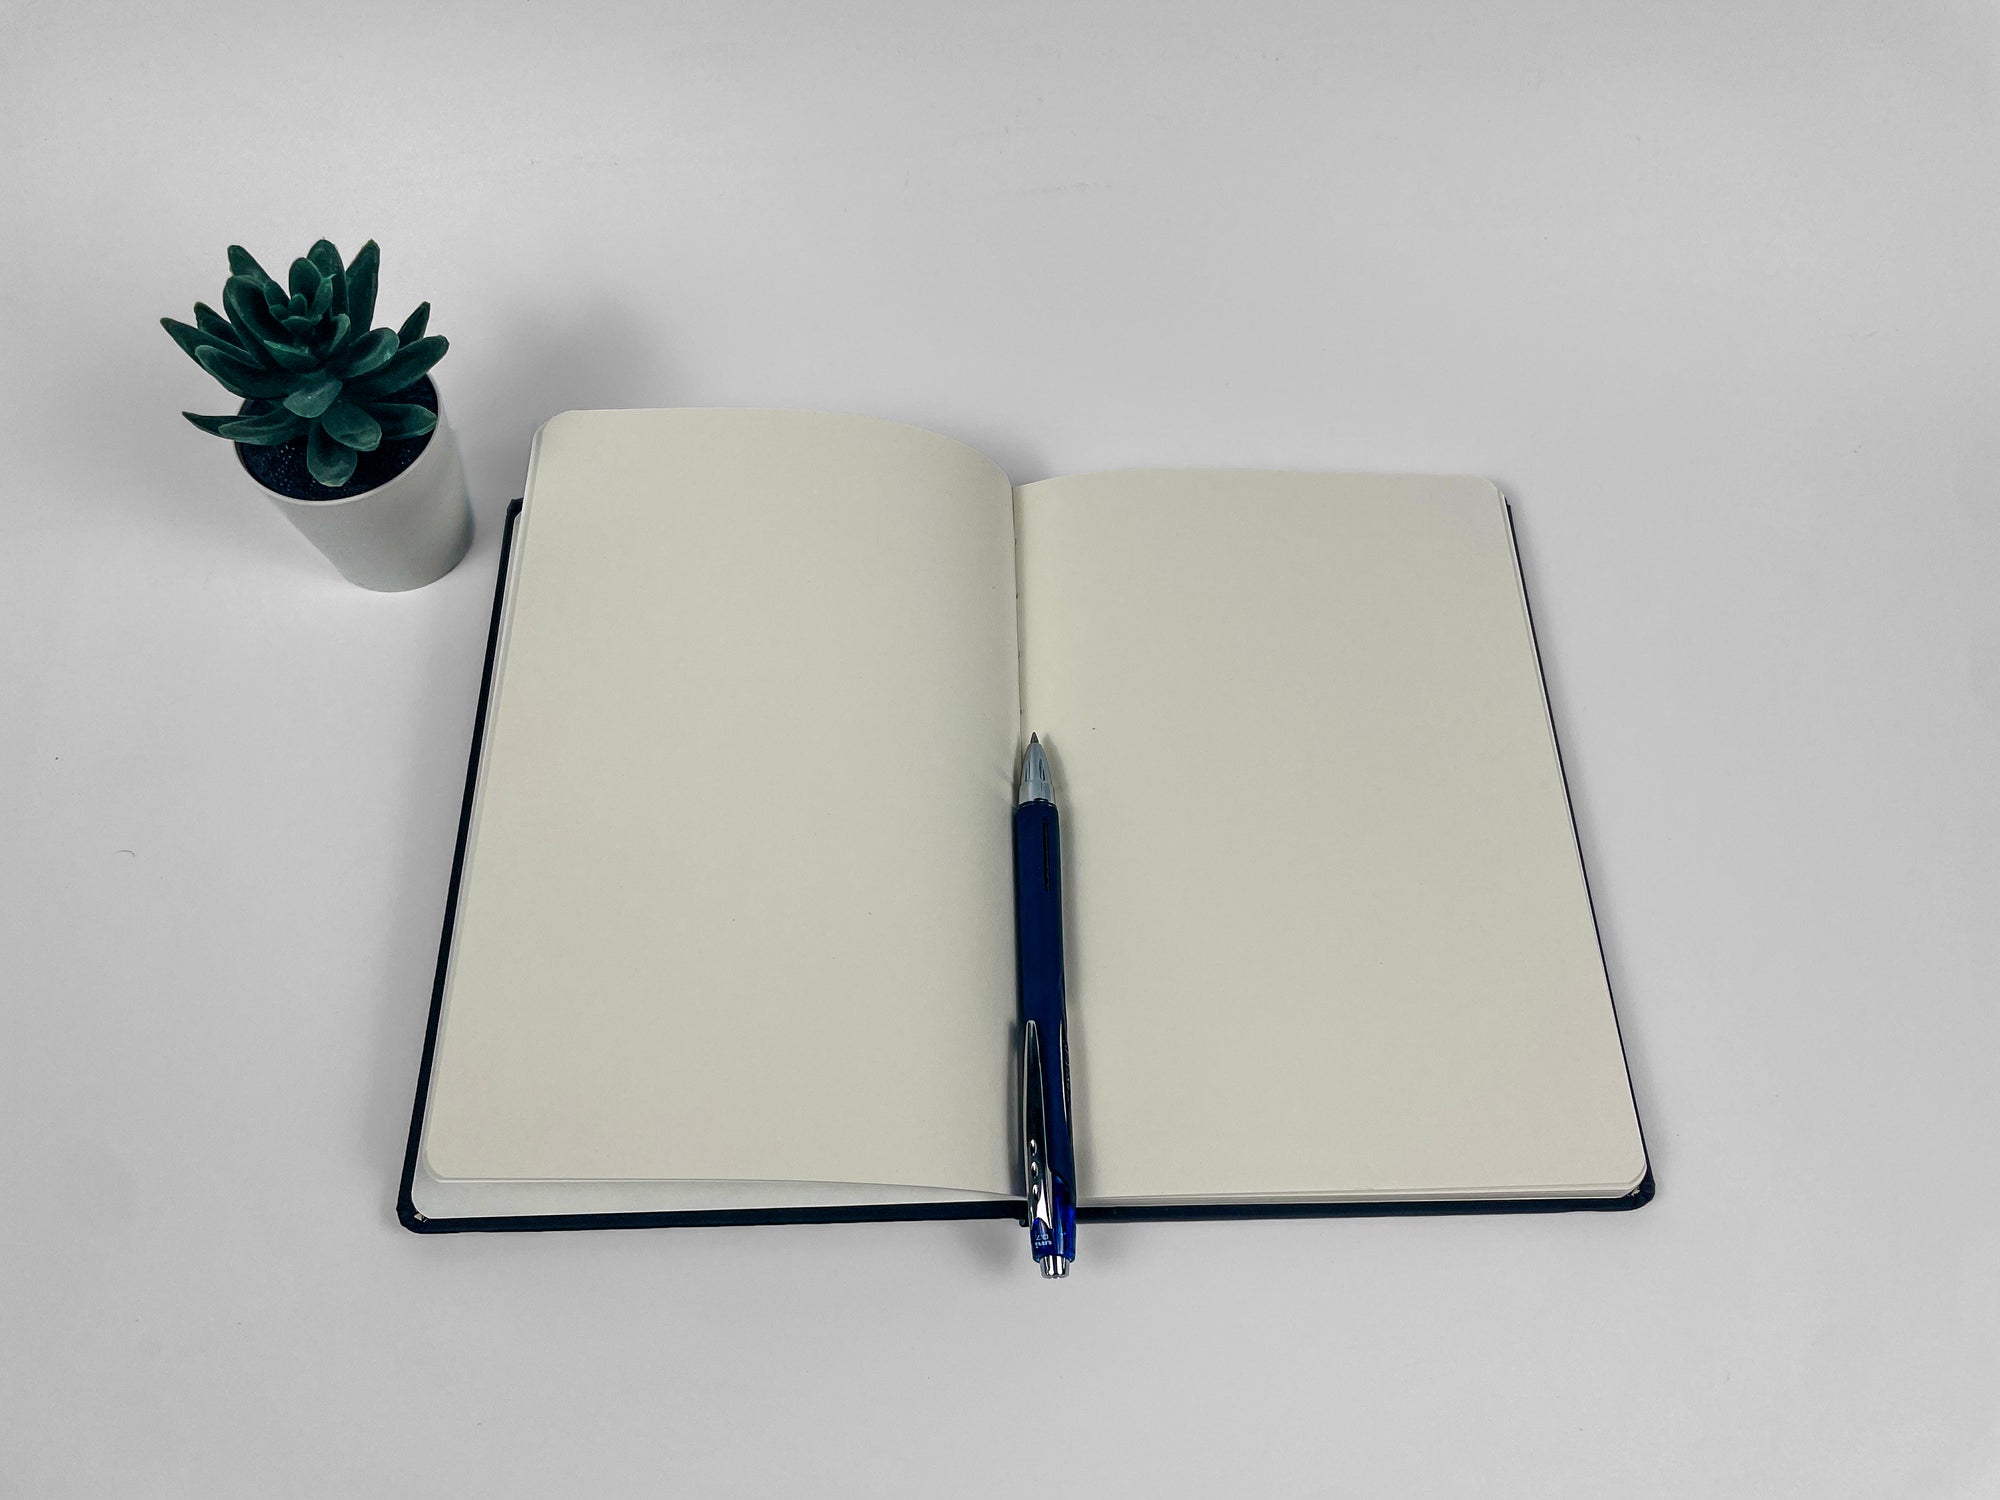 Kiyome SHIKO Notebook | Matte Hard Cover | 80 GSM | A5 | 160 Plain Pages